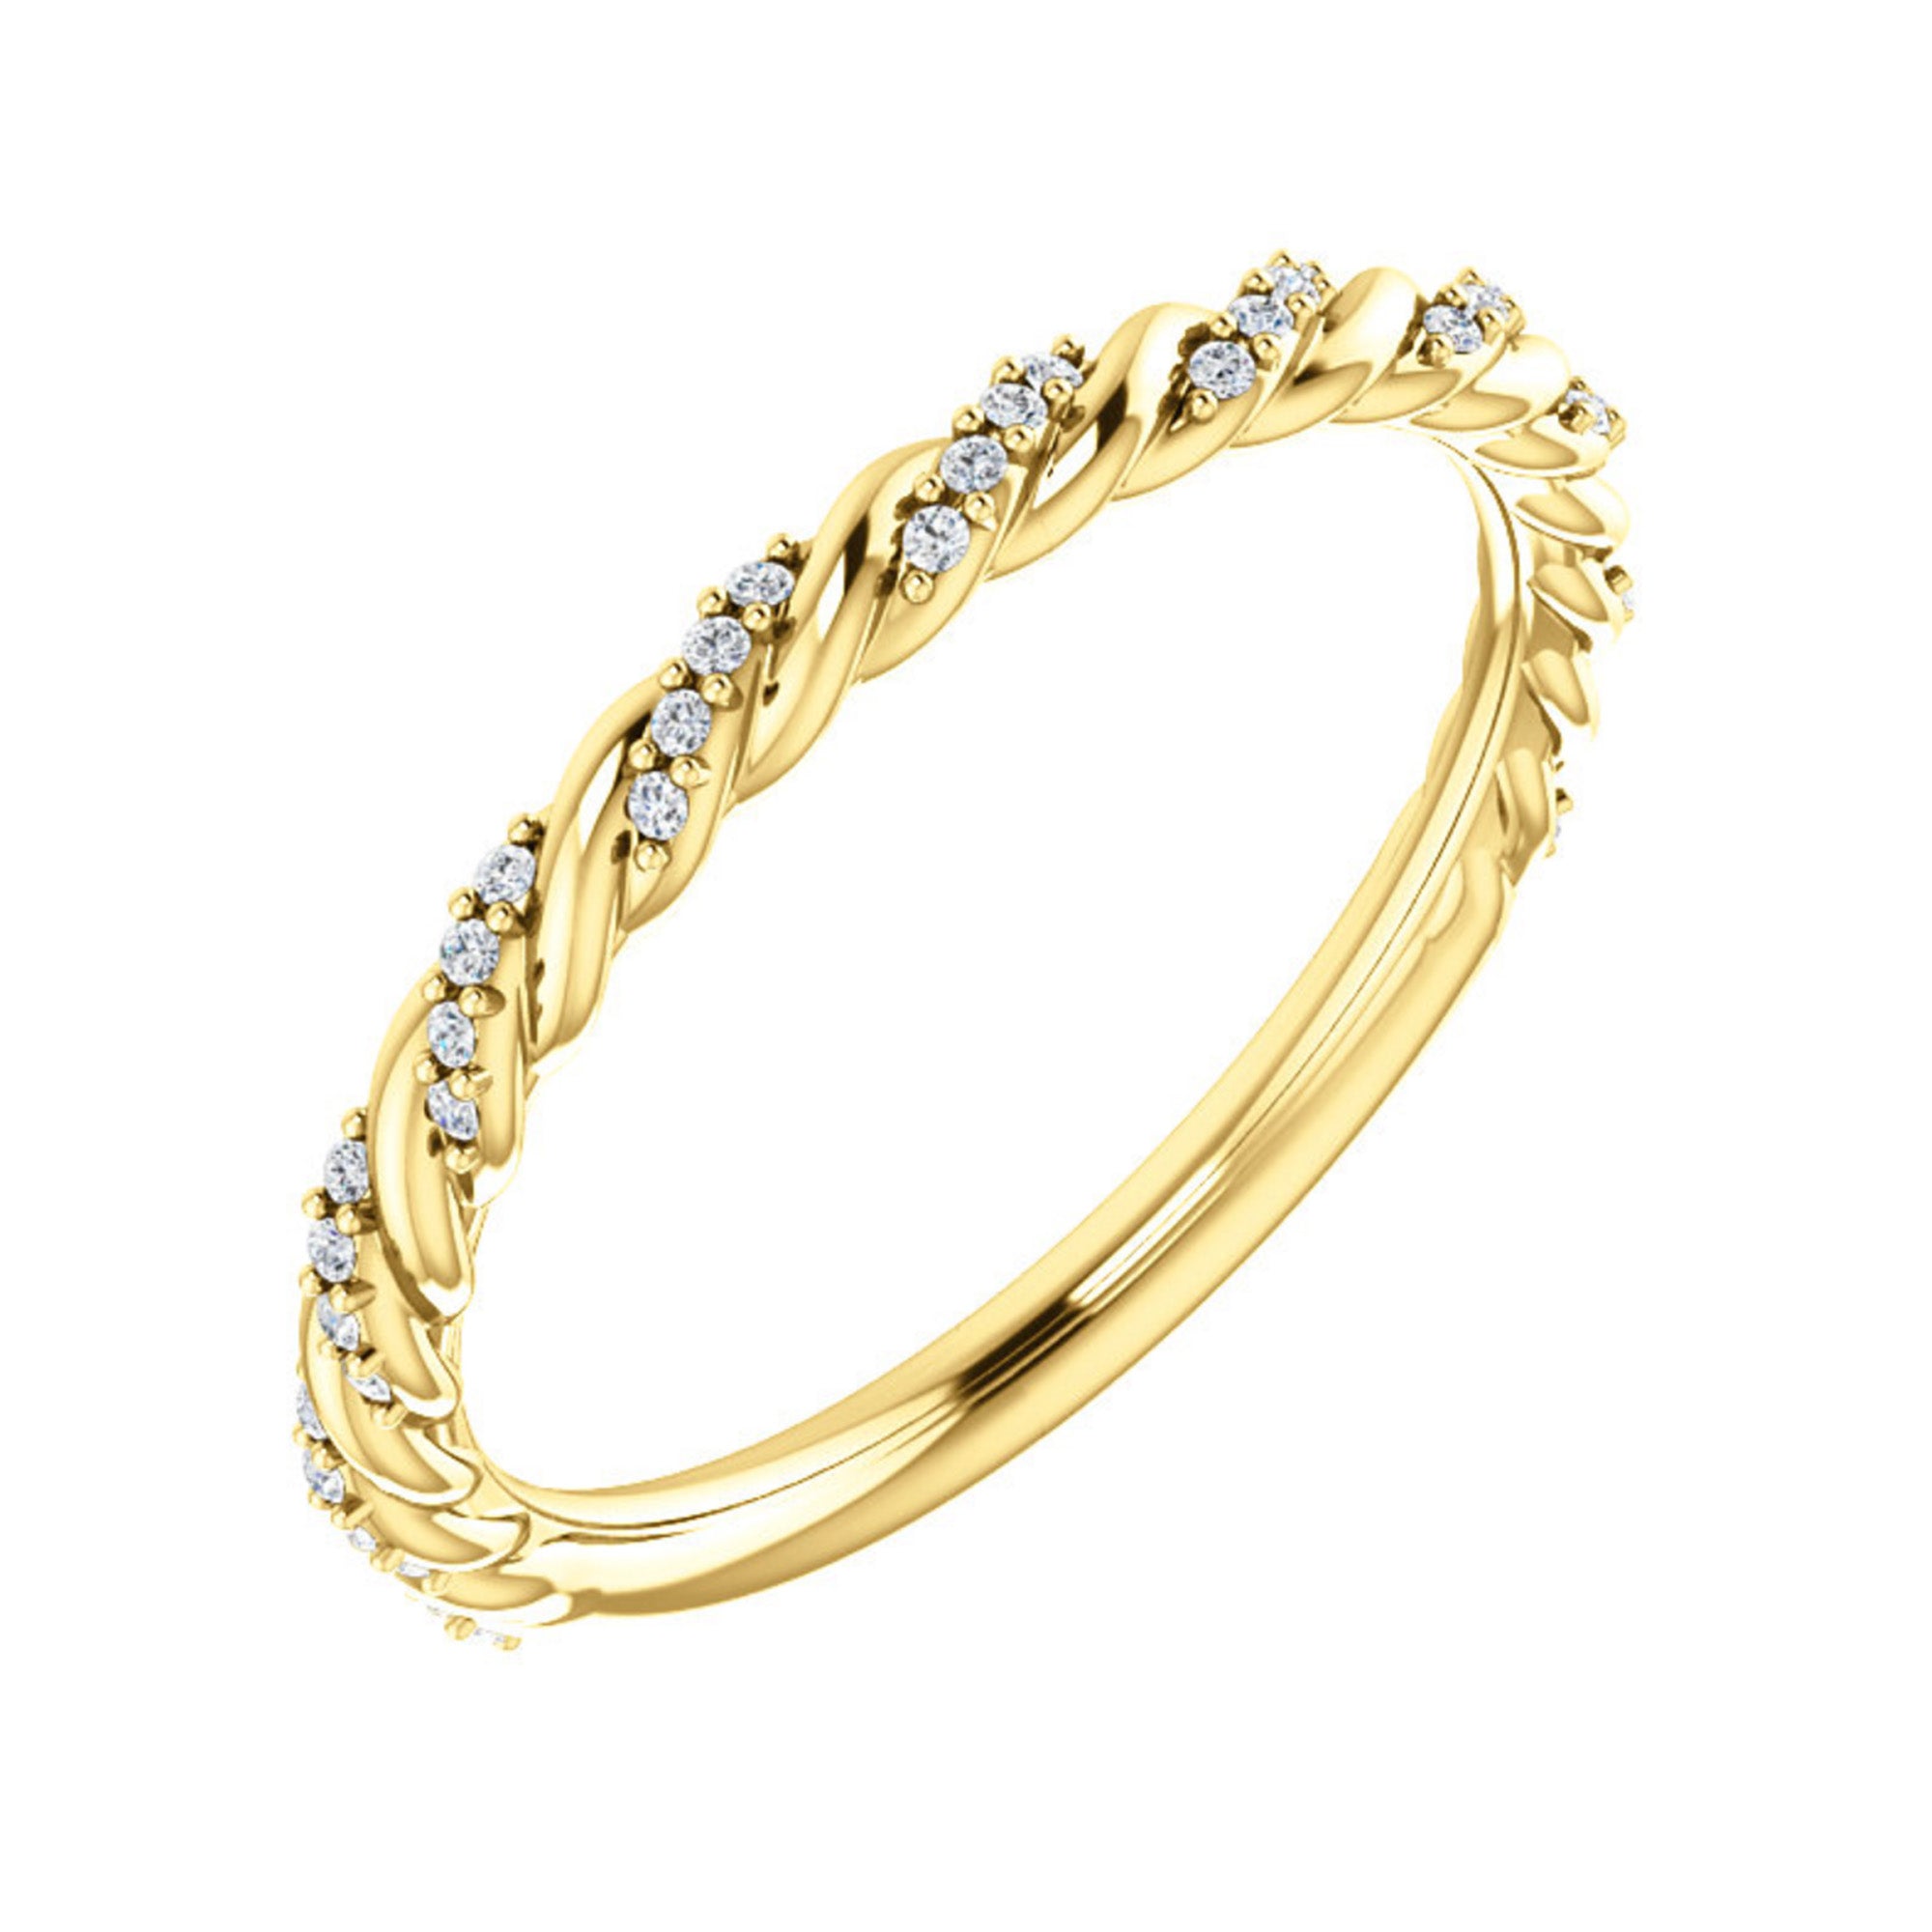 Pave Twisted Diamond Stack Band in White, Yellow or Rose Gold - Talisman Collection Fine Jewelers